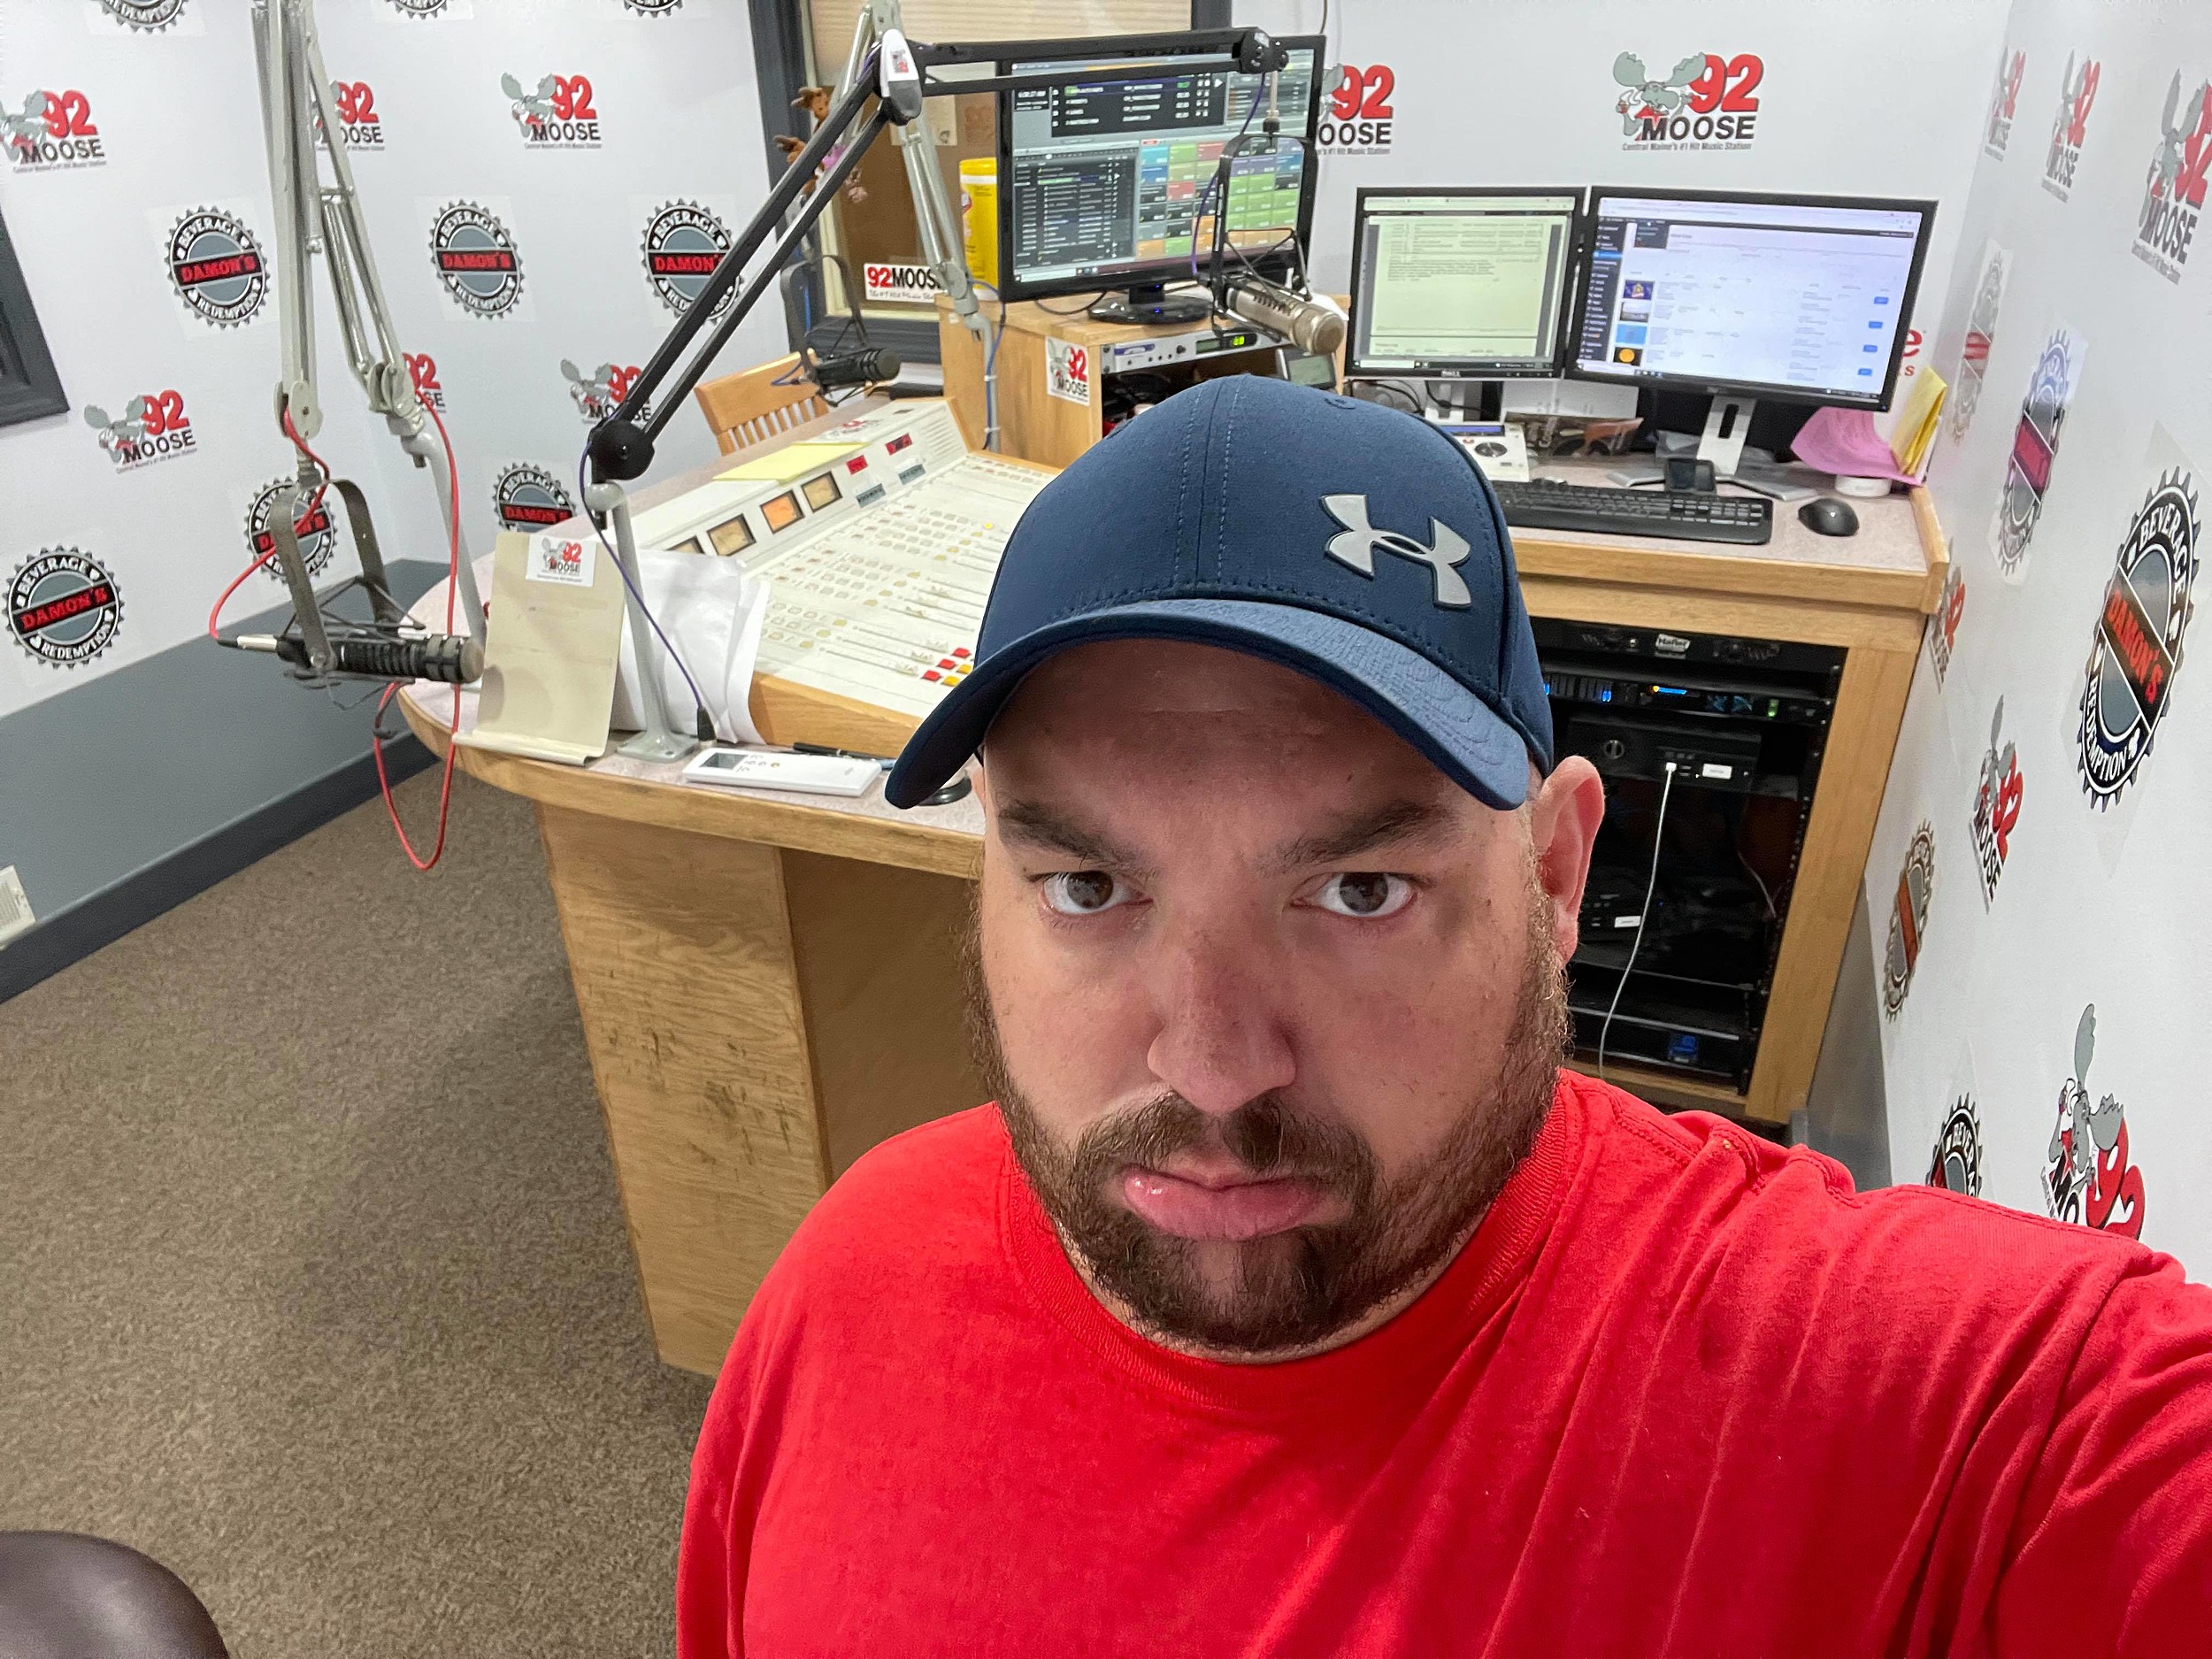 Its a Strange Day as I Do The Moose Morning Show Alone